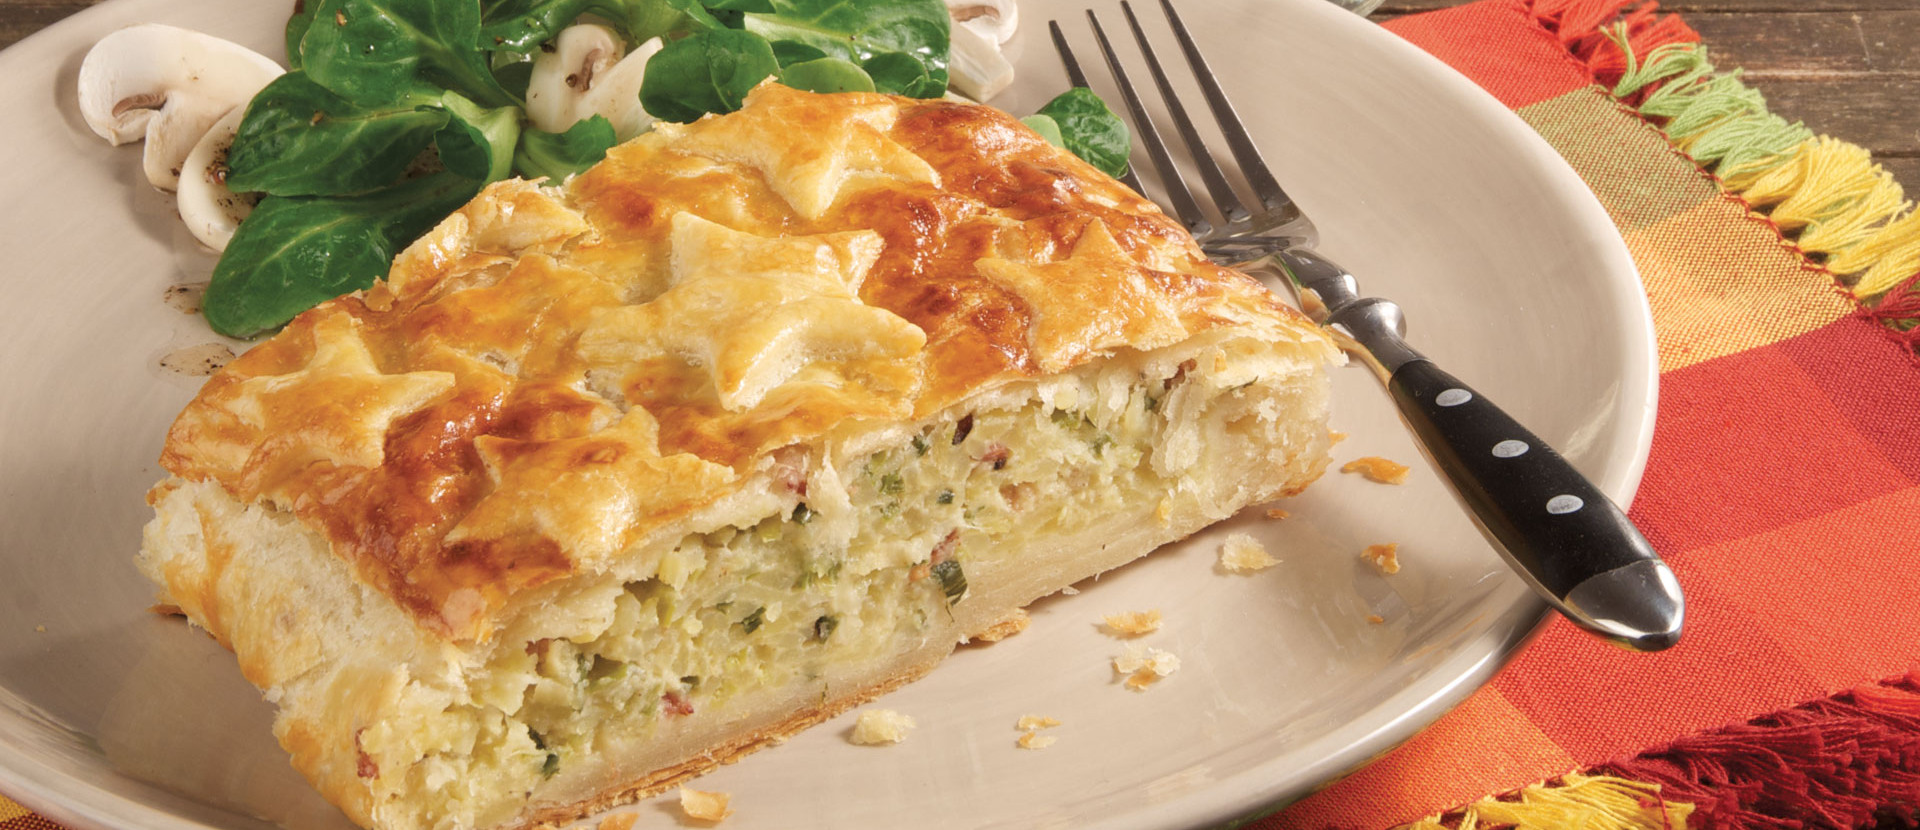 Lauch Schinken Quiche - kinds of food from various countries